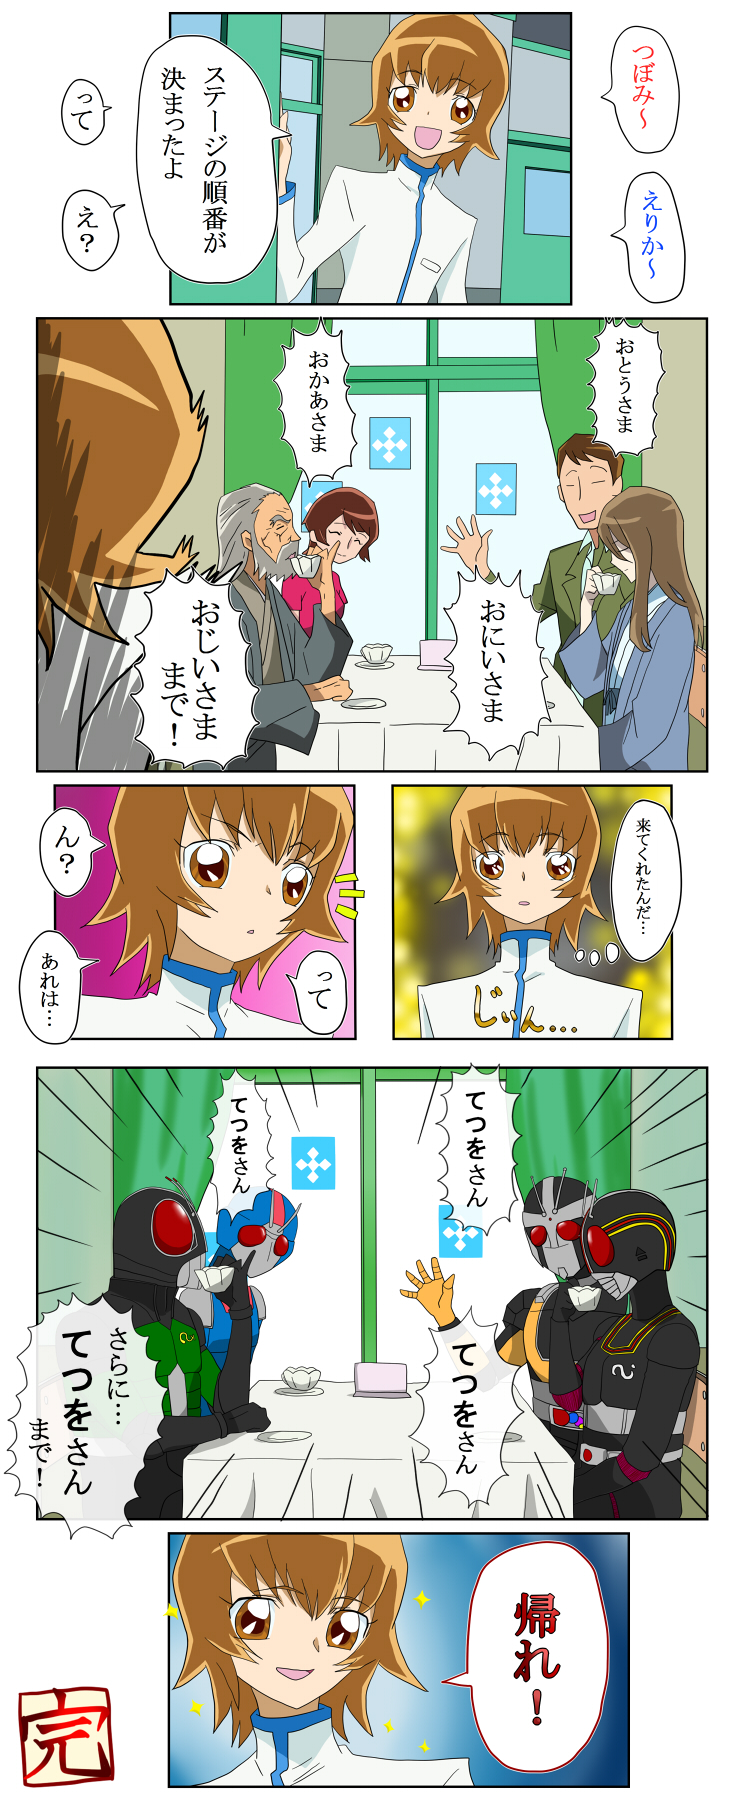 2girls 6+boys brown_hair comic crossover cup curtains drinking emphasis_lines family female heartcatch_precure! highres kamen_rider kamen_rider_black_rx kamen_rider_black_rx_(series) kurooni_(avenir) long_hair male multiple_boys multiple_girls multiple_persona myoudouin_gentarou myoudouin_itsuki myoudouin_satsuki myoudouin_siblings'_father myoudouin_tsubaki old_man open_mouth pinky_out precure short_hair sitting table teacup translation_request waving white_hair